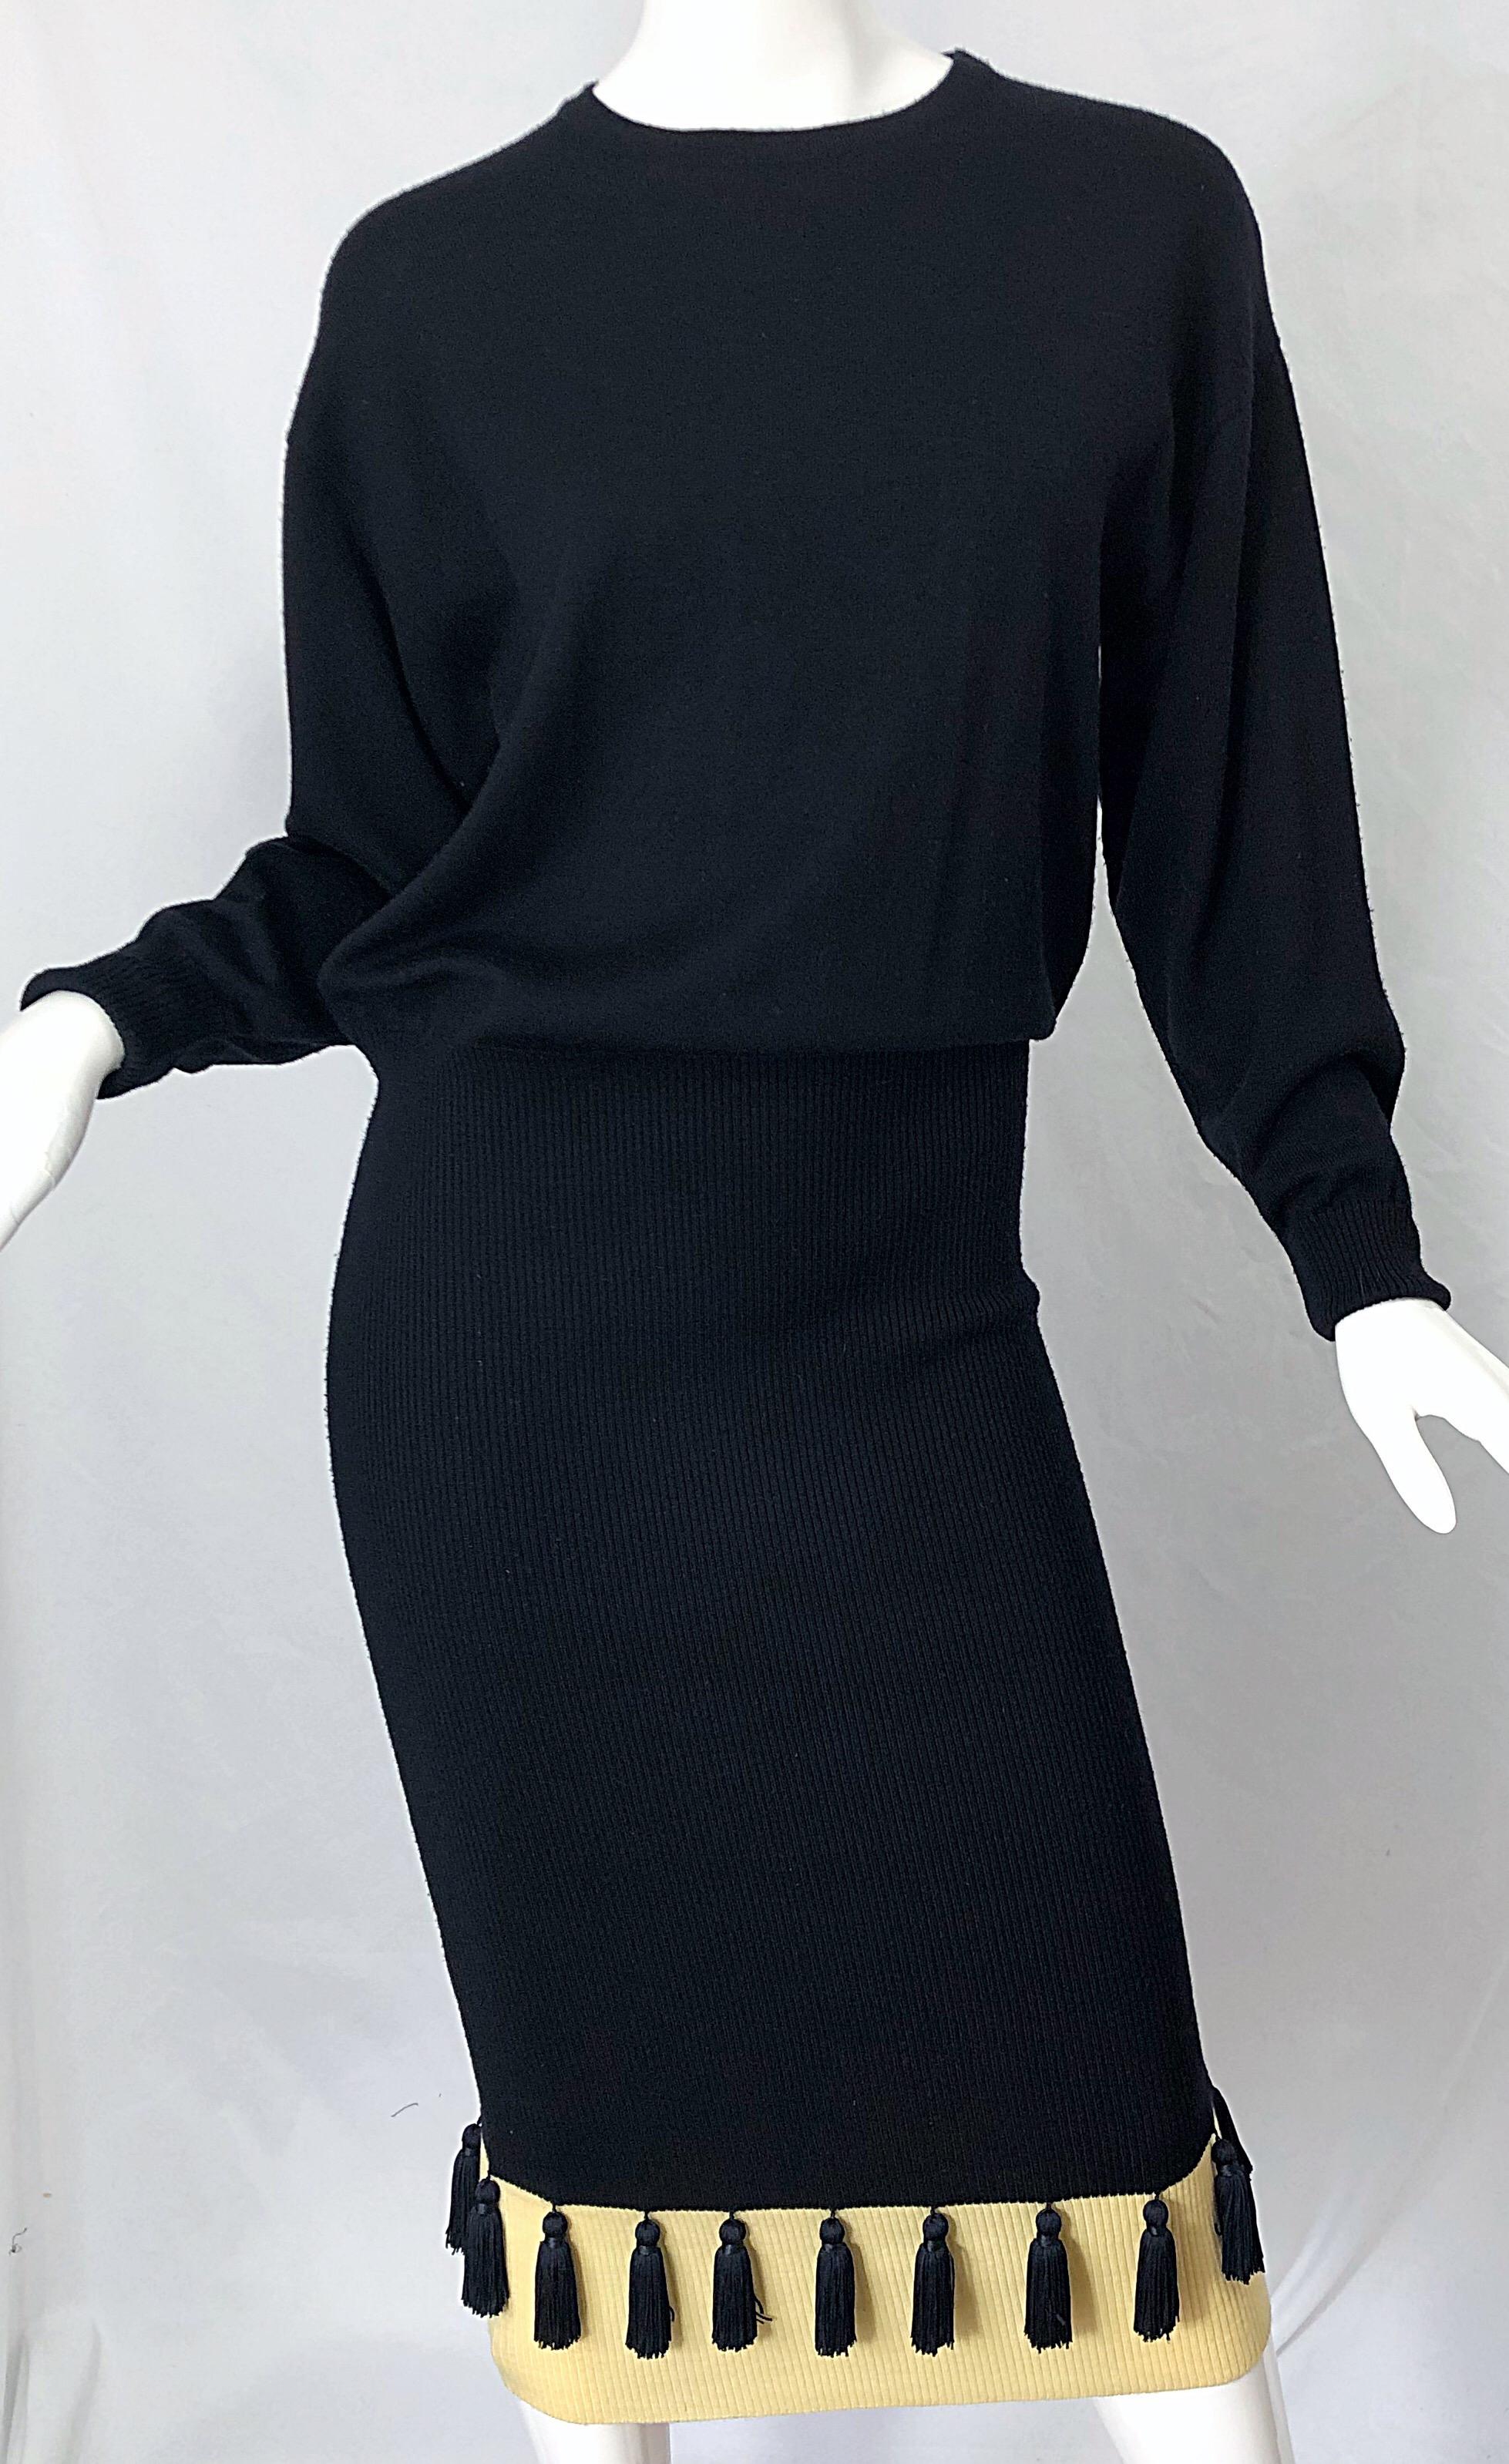 1980s Angelo Tarlazzi Black and Ivory Wool Dolman Sleeve 80s Sweater Dress For Sale 2